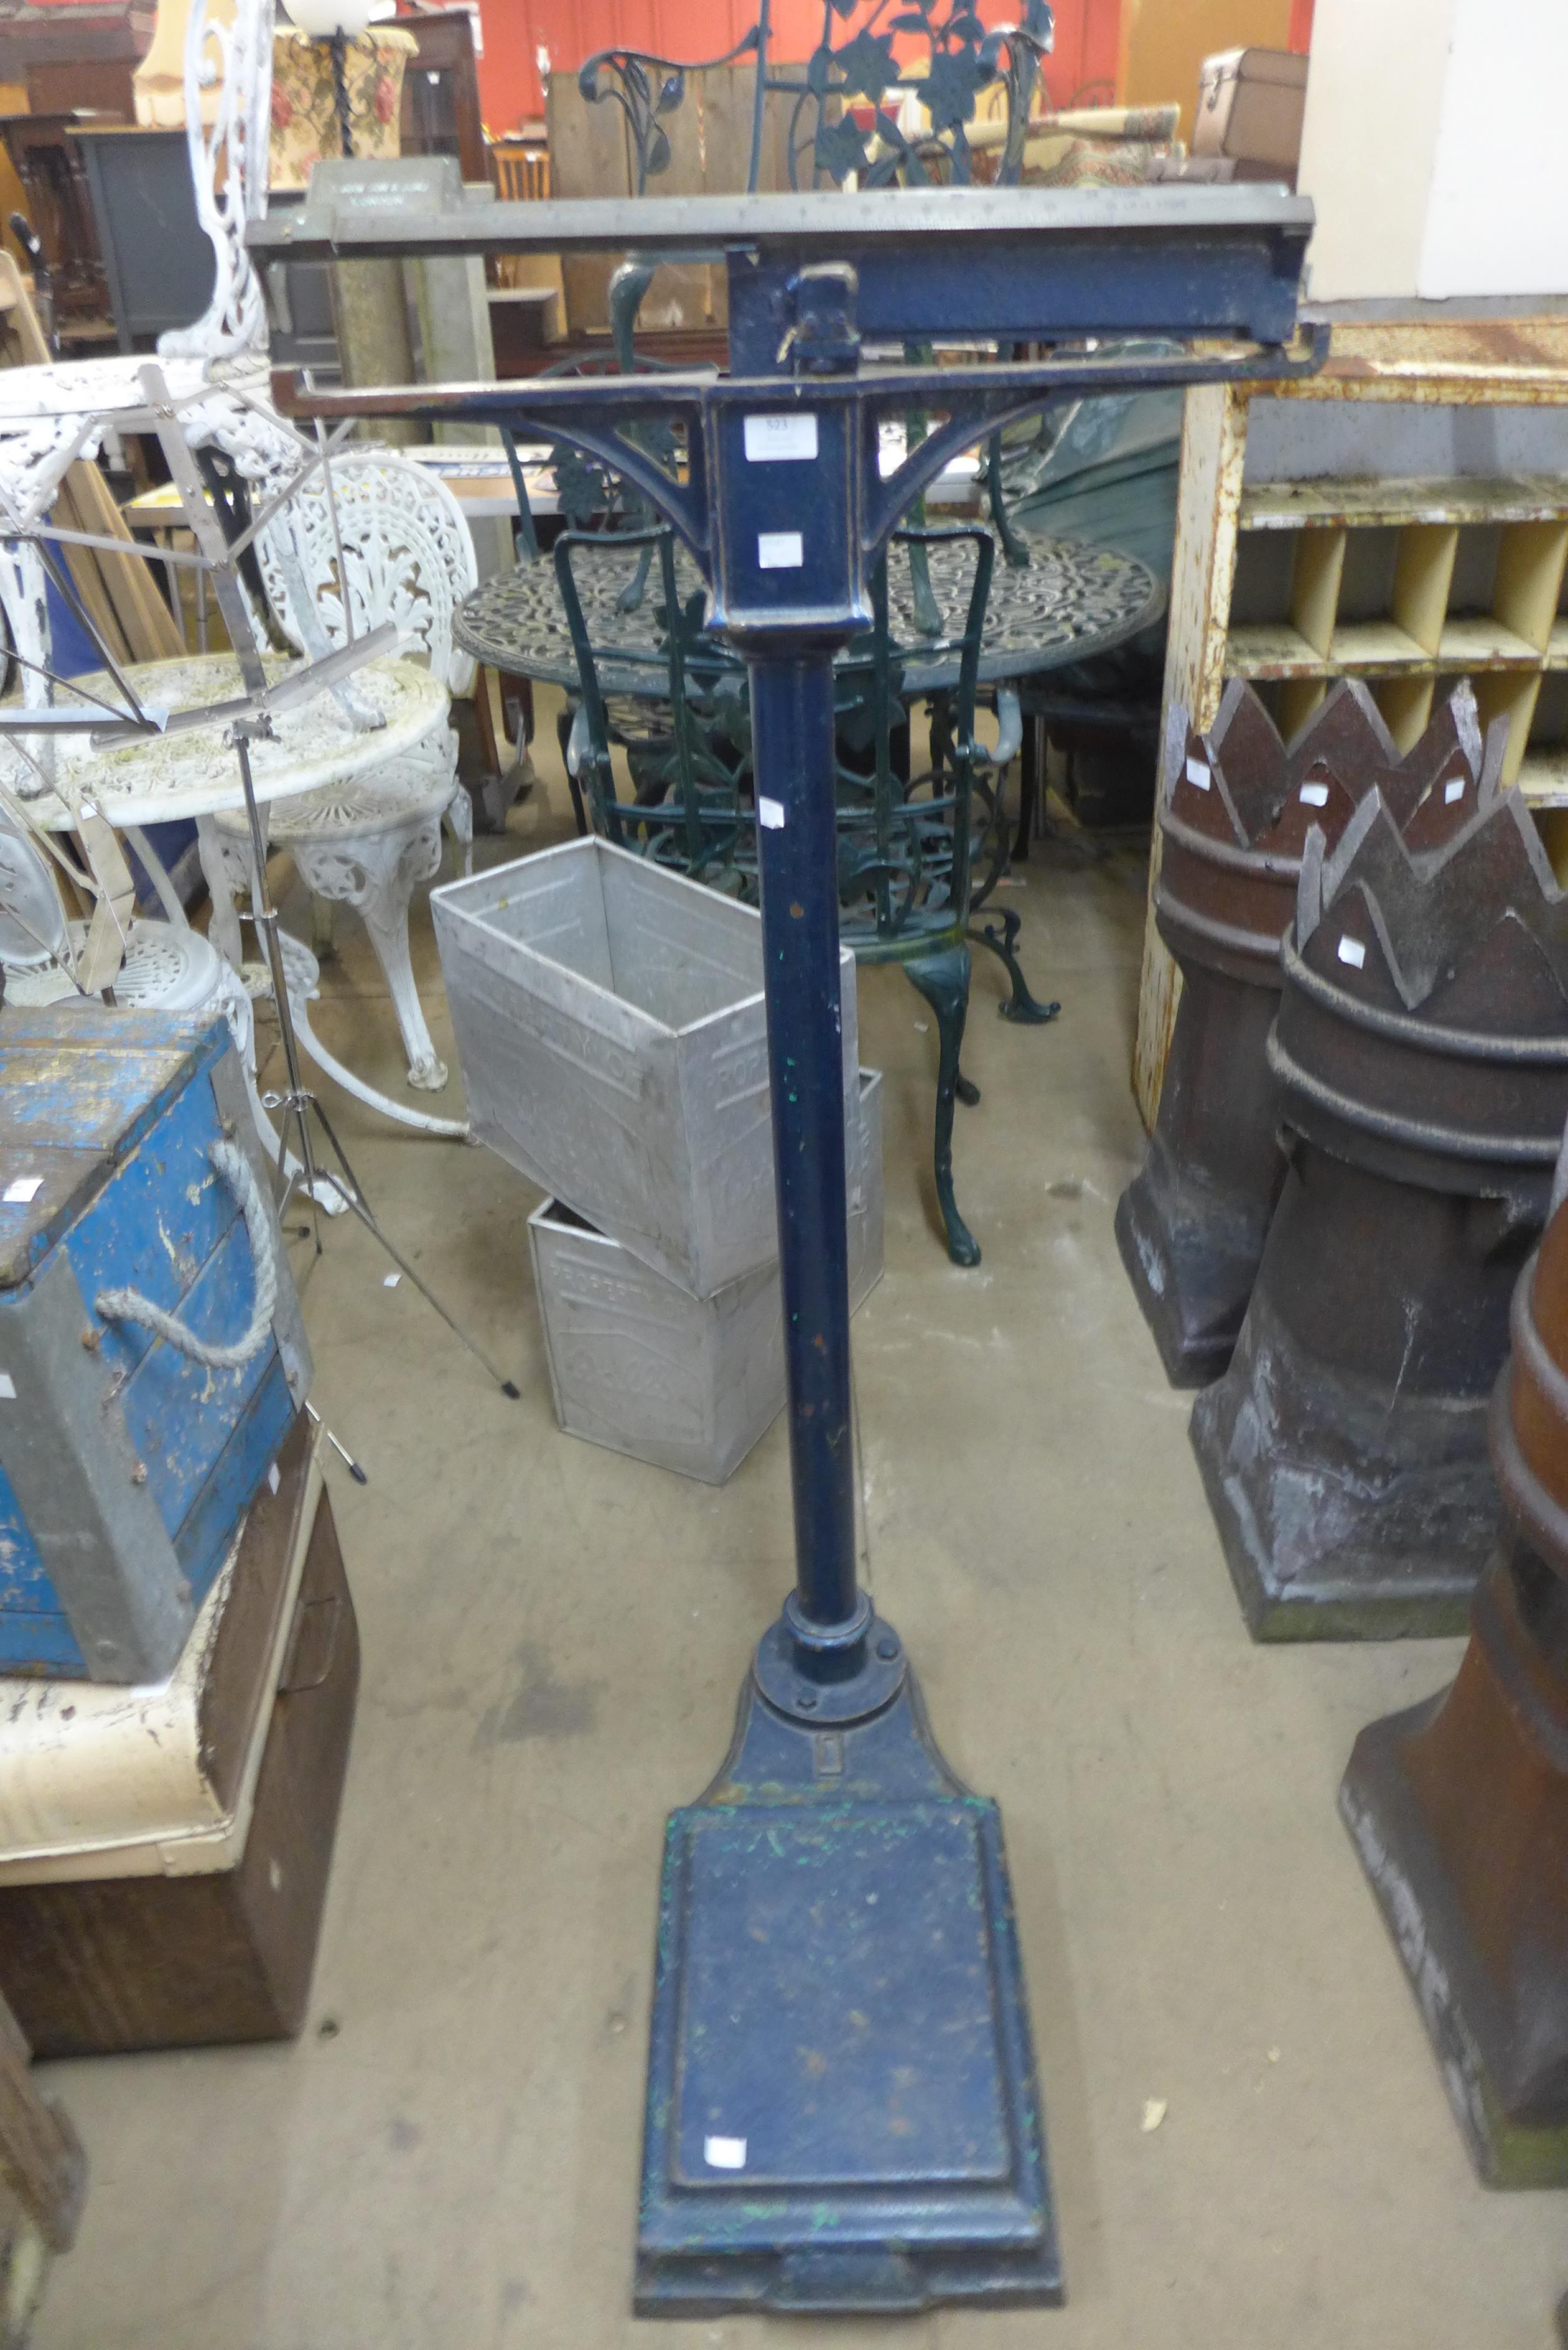 A set of vintage weighing scales by S. Mawson & Sons, London